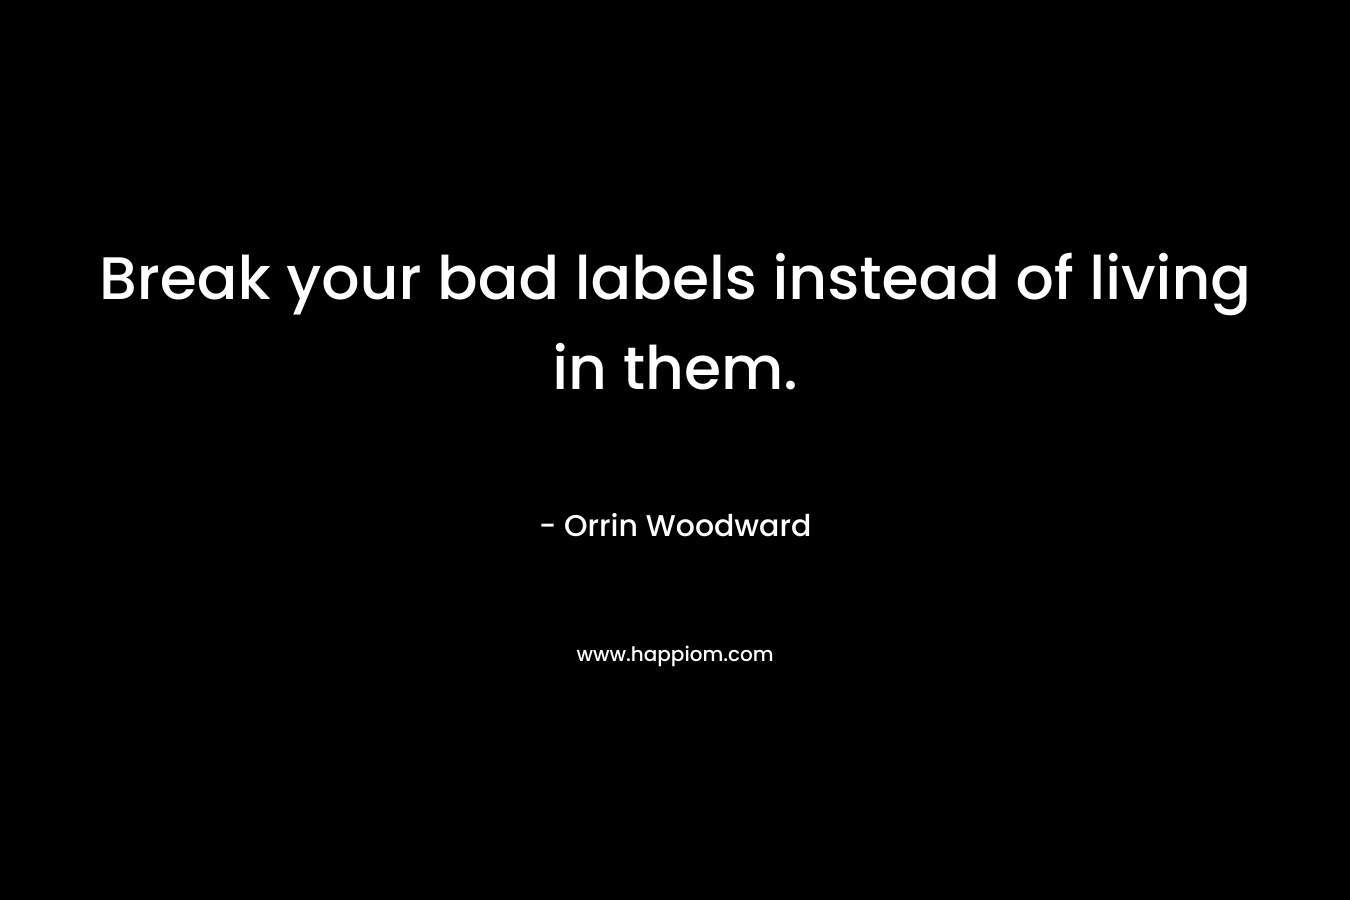 Break your bad labels instead of living in them. – Orrin Woodward